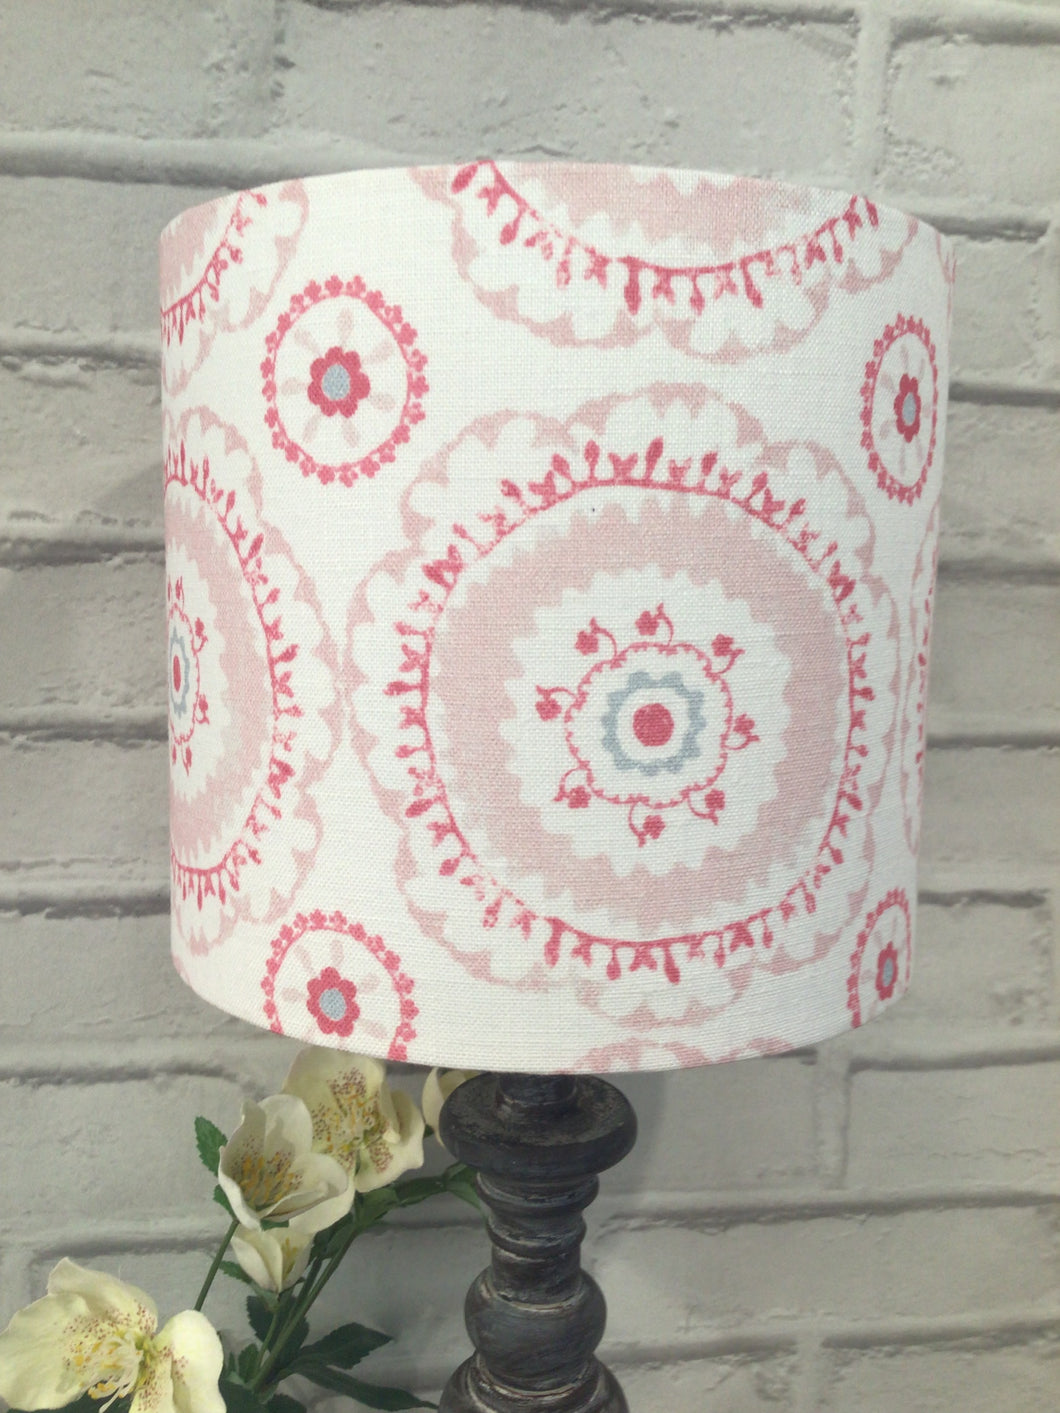 Lampshade - Peony and Sage Suzanni pinks linen - 20cm drum lampshade